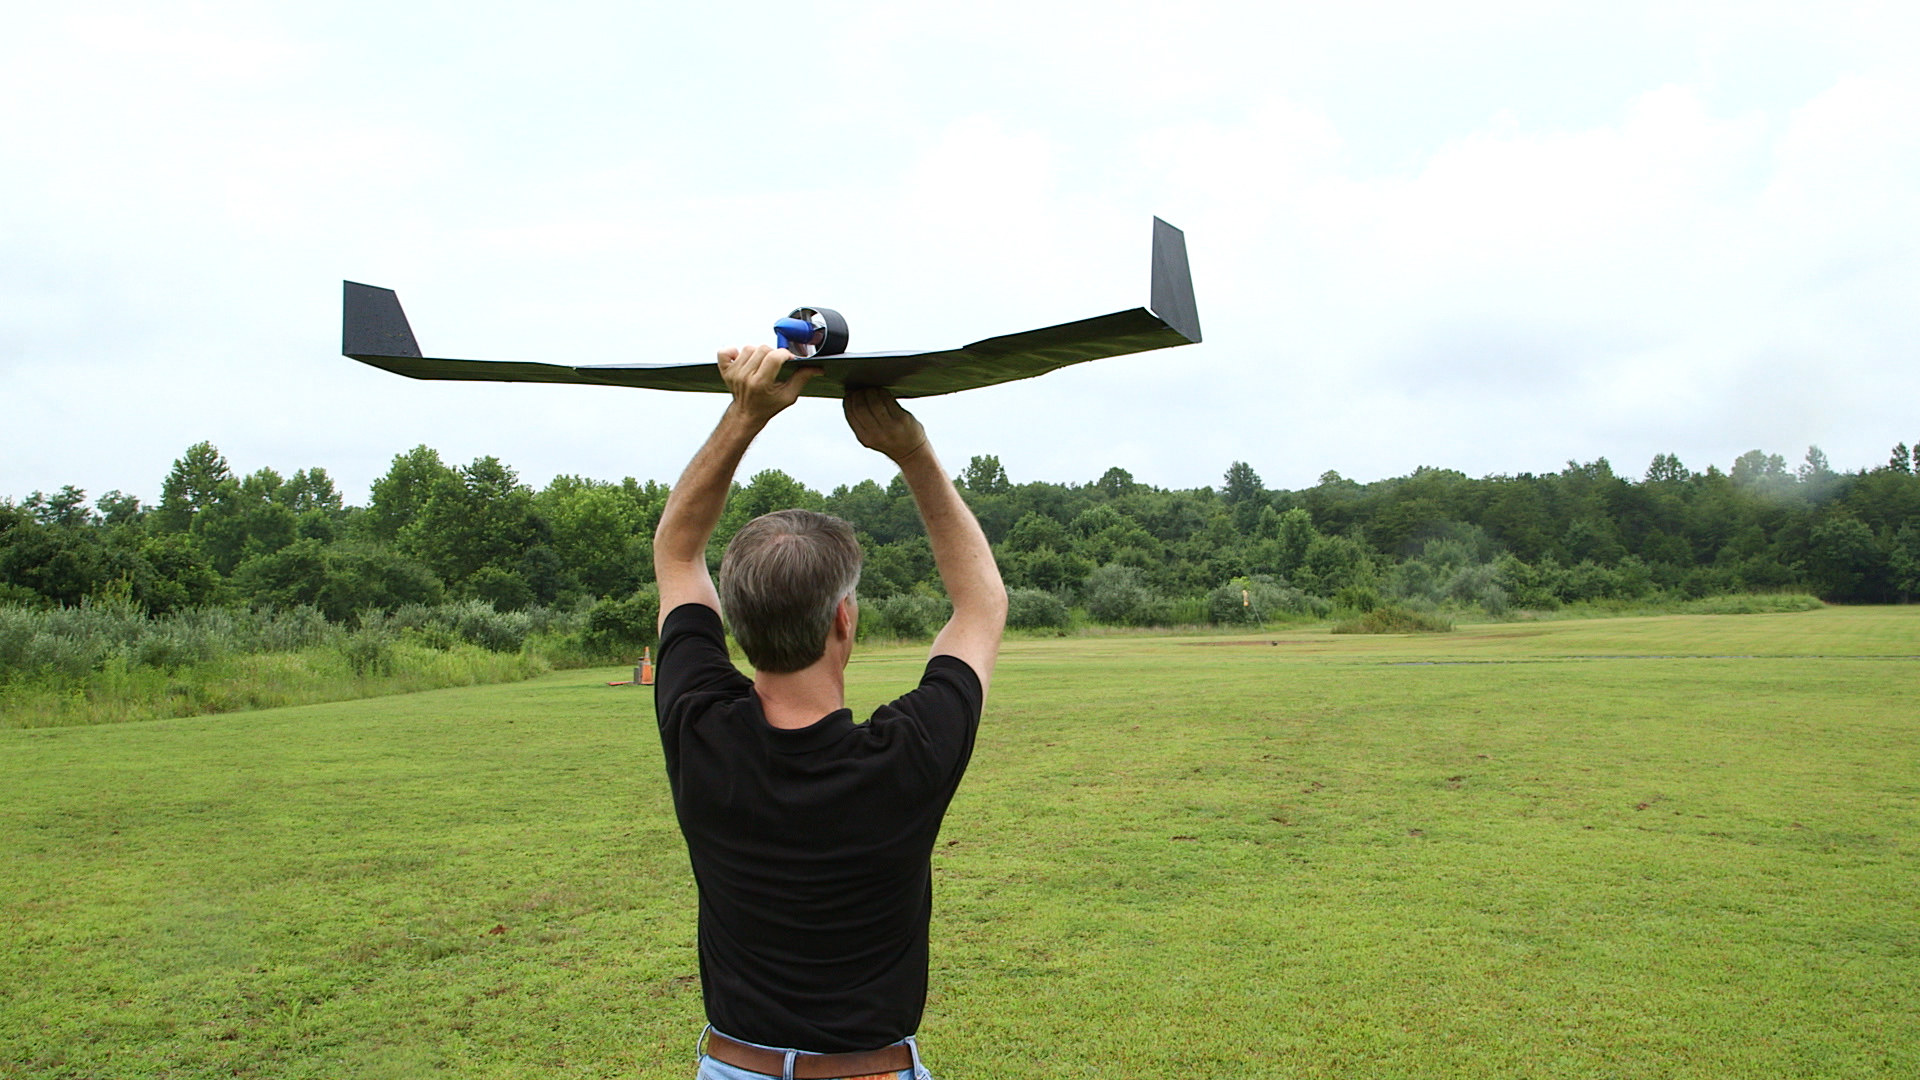 Man holds a small airplane above his head while standing in a field